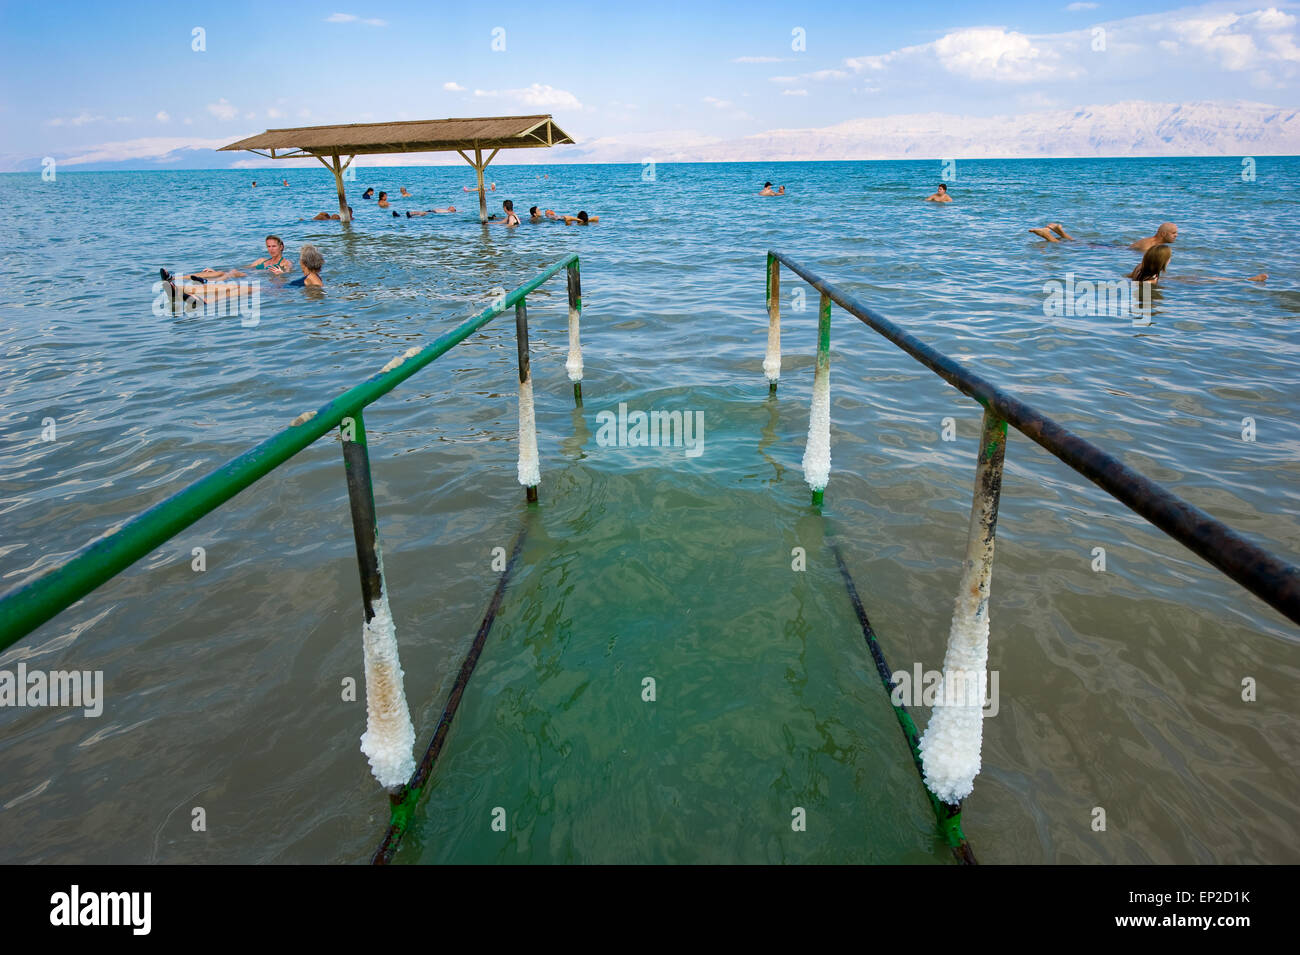 DEAD SEA, ISRAEL - OCT 13, 2014: People are floating in the water of the dead sea in Israel Stock Photo